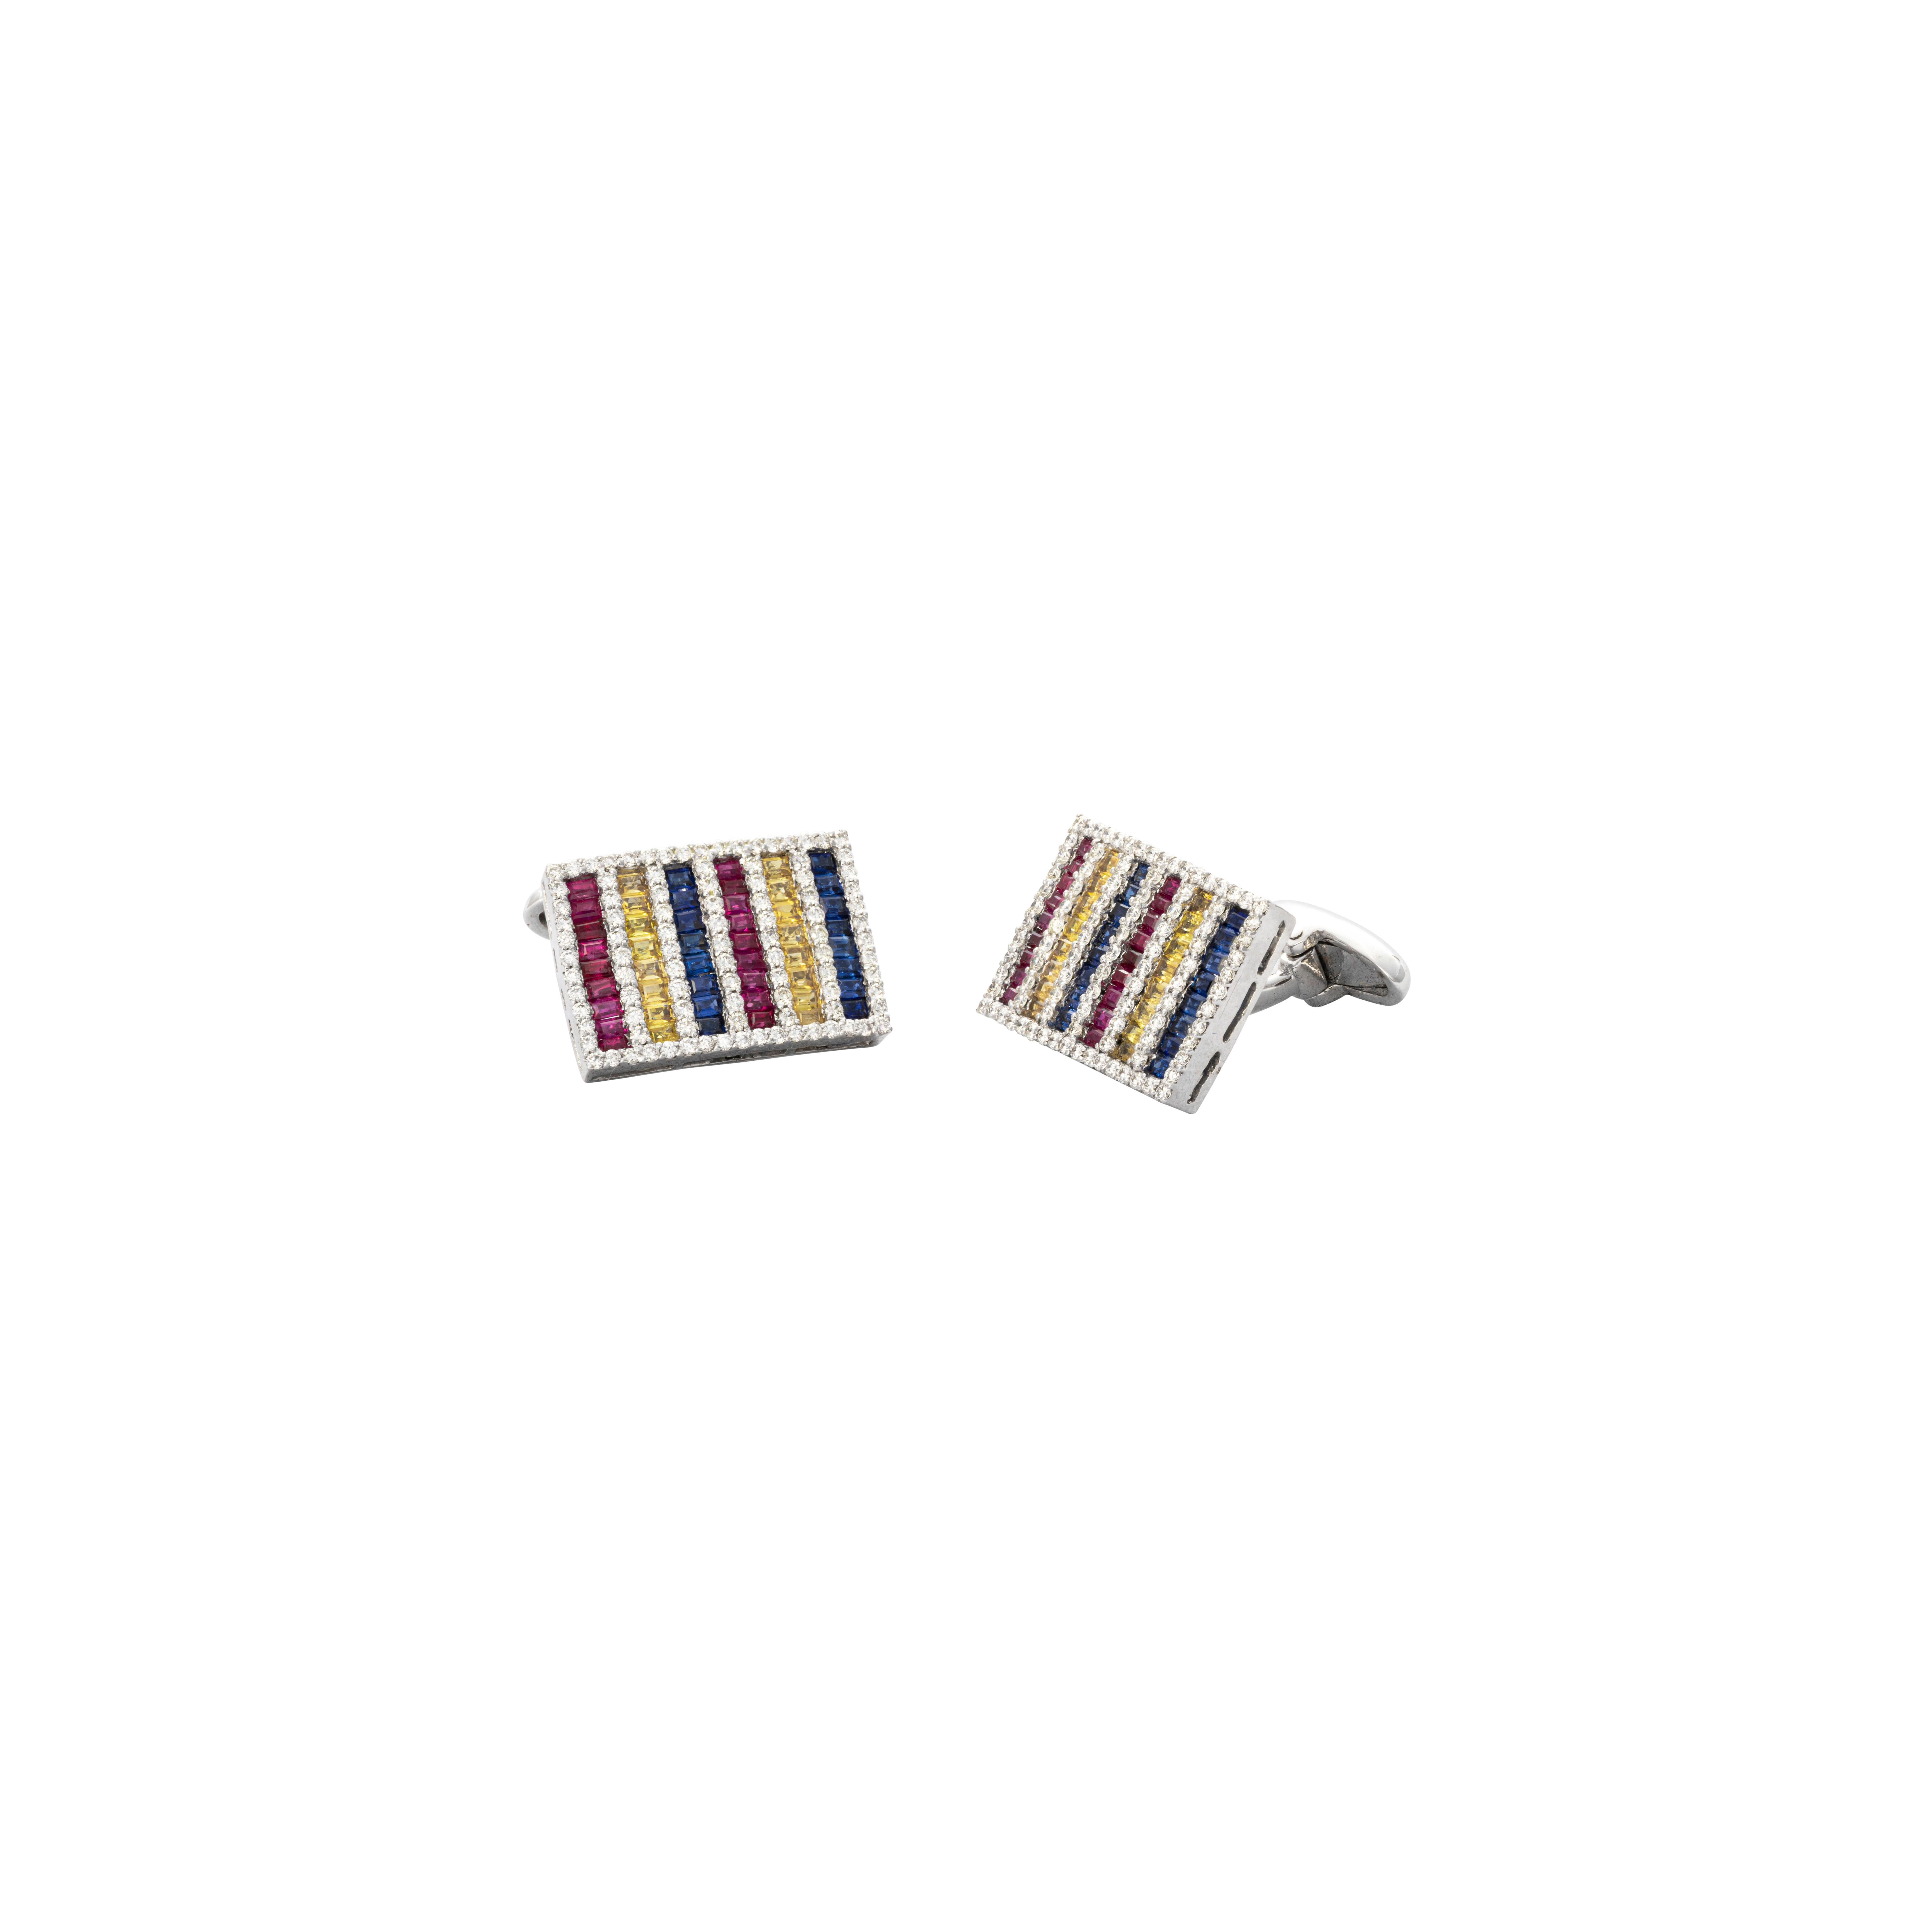 18 Karat White Gold Ruby Sapphire Diamond Cufflinks

Classy & modern cufflinks crafted for the discerning gentleman. Set in 18 Karat white gold & studded with a mix of perfectly calibrated rubies, yellow and blue sapphires accentuated by white